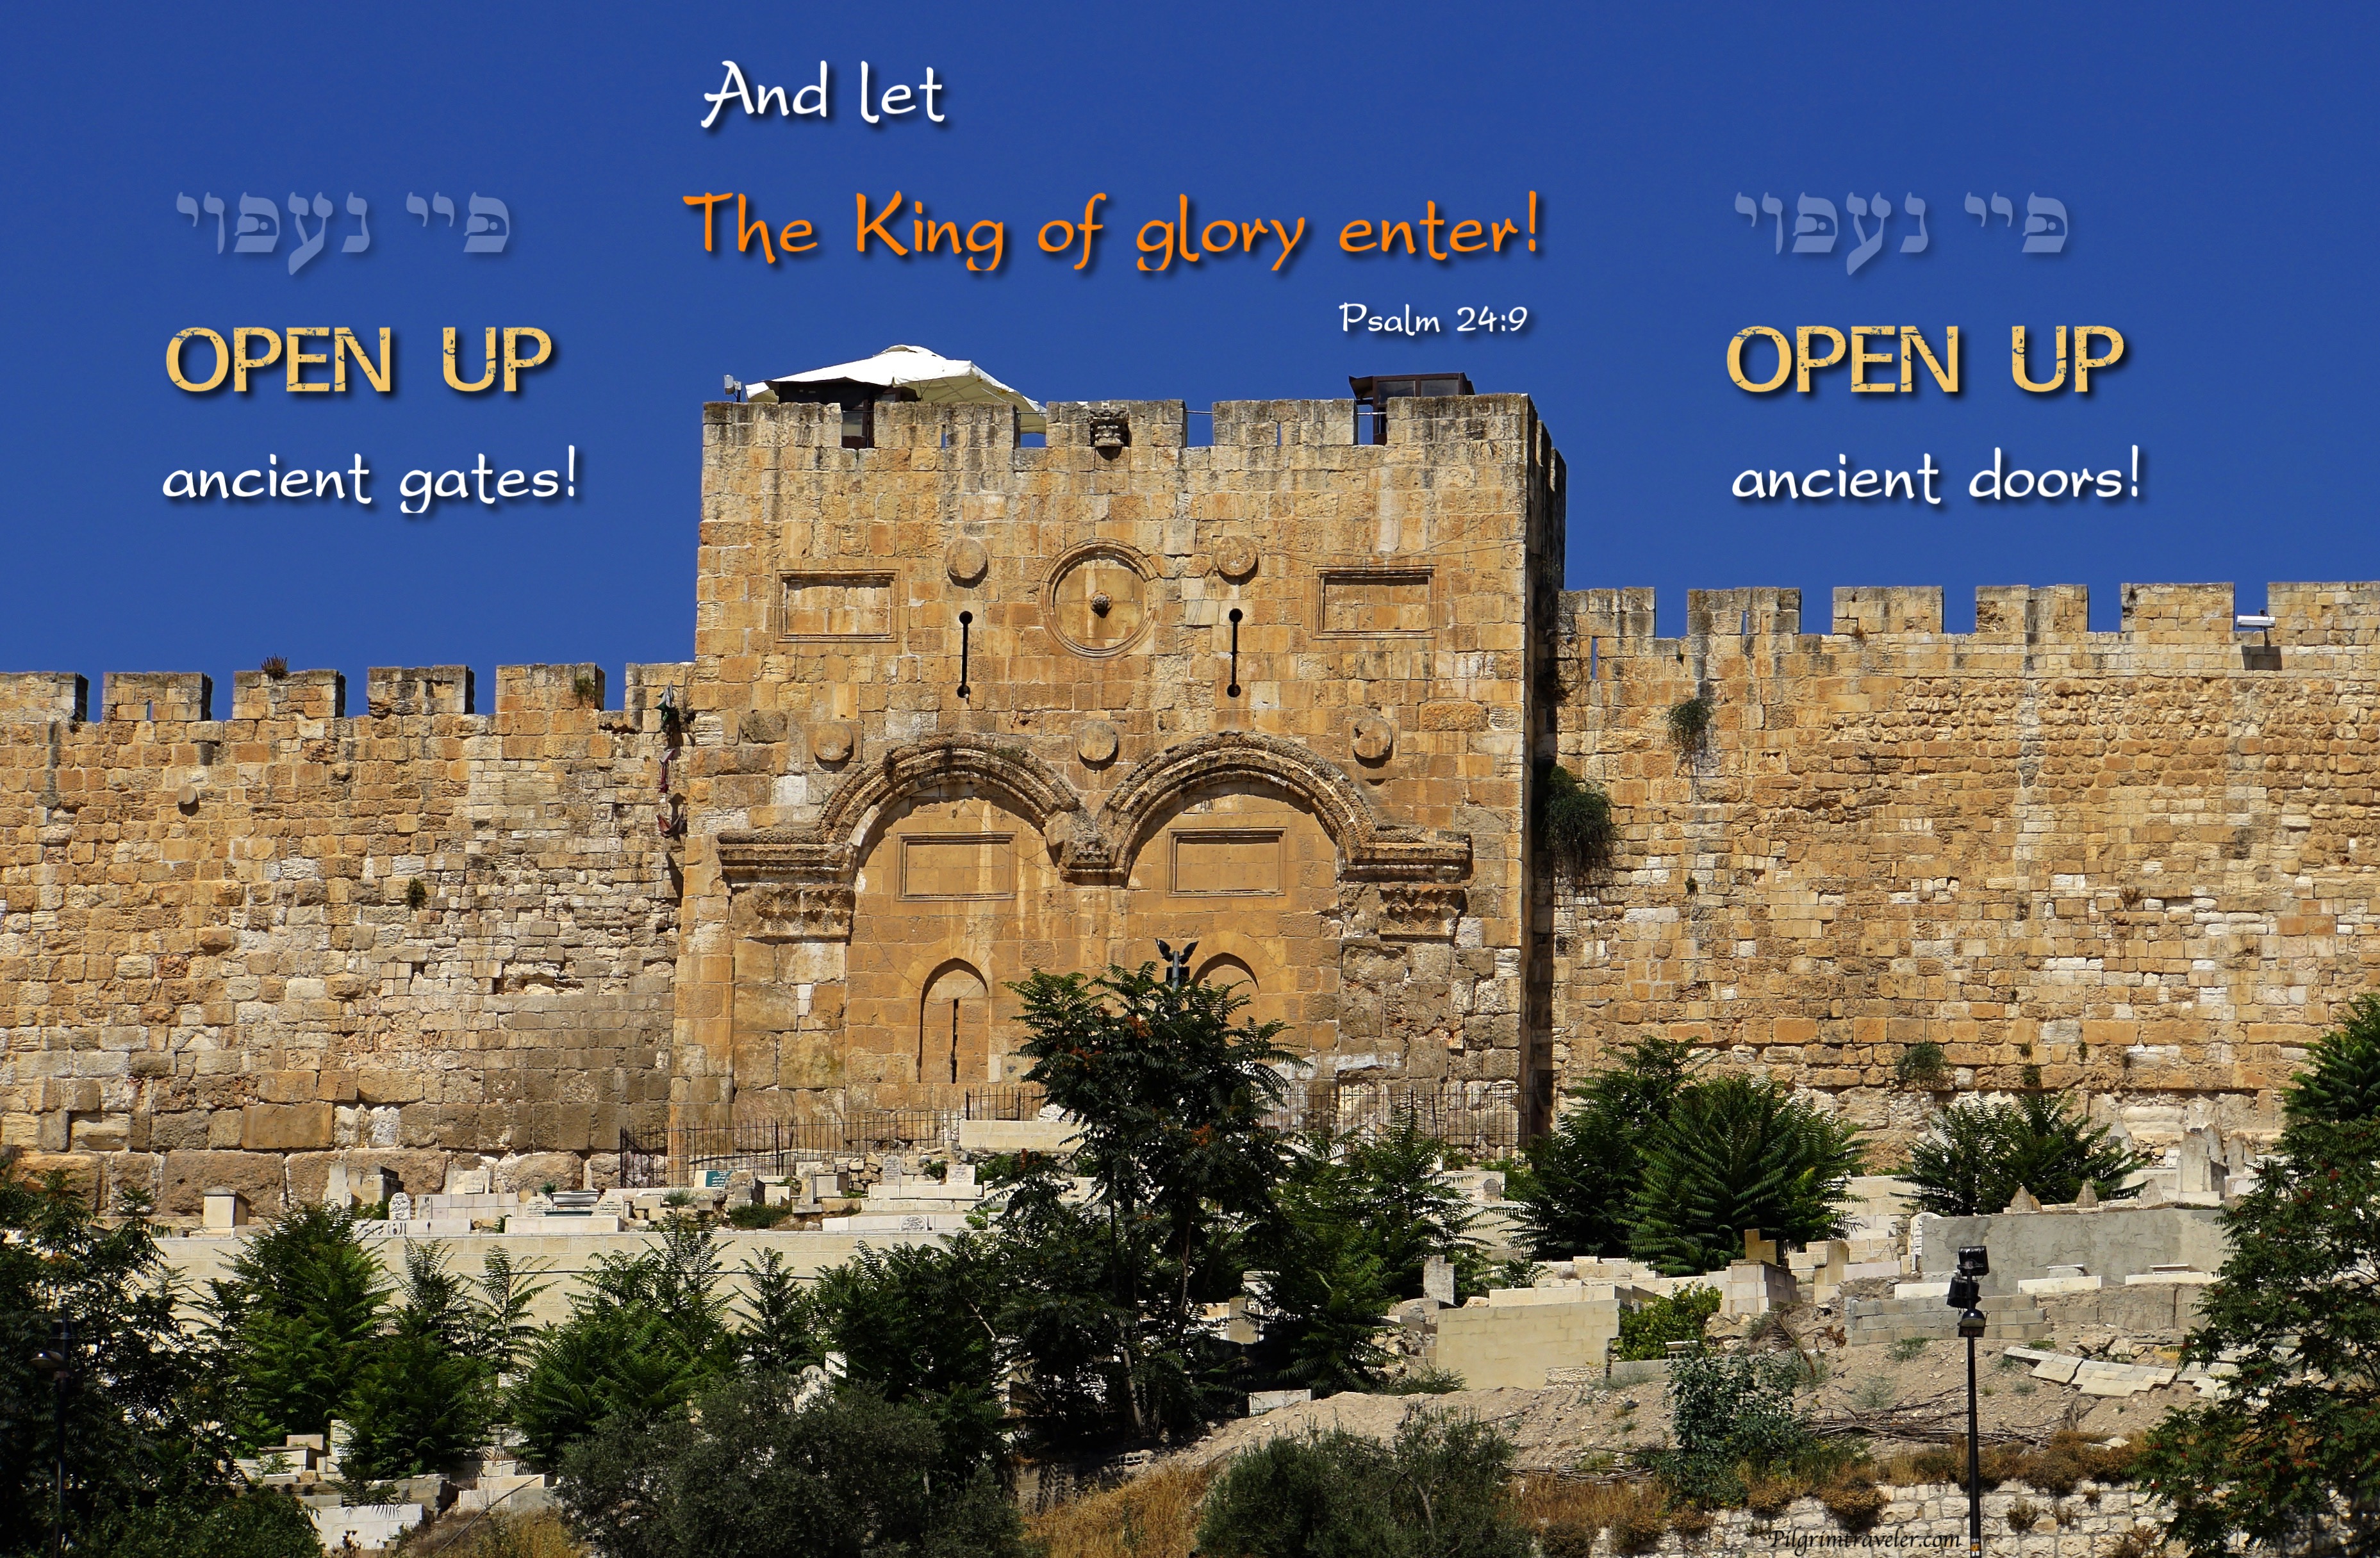 Psalm 24:7 "Open up, ancient gates! Open up, ancient doors and let the King  of glory enter!" -